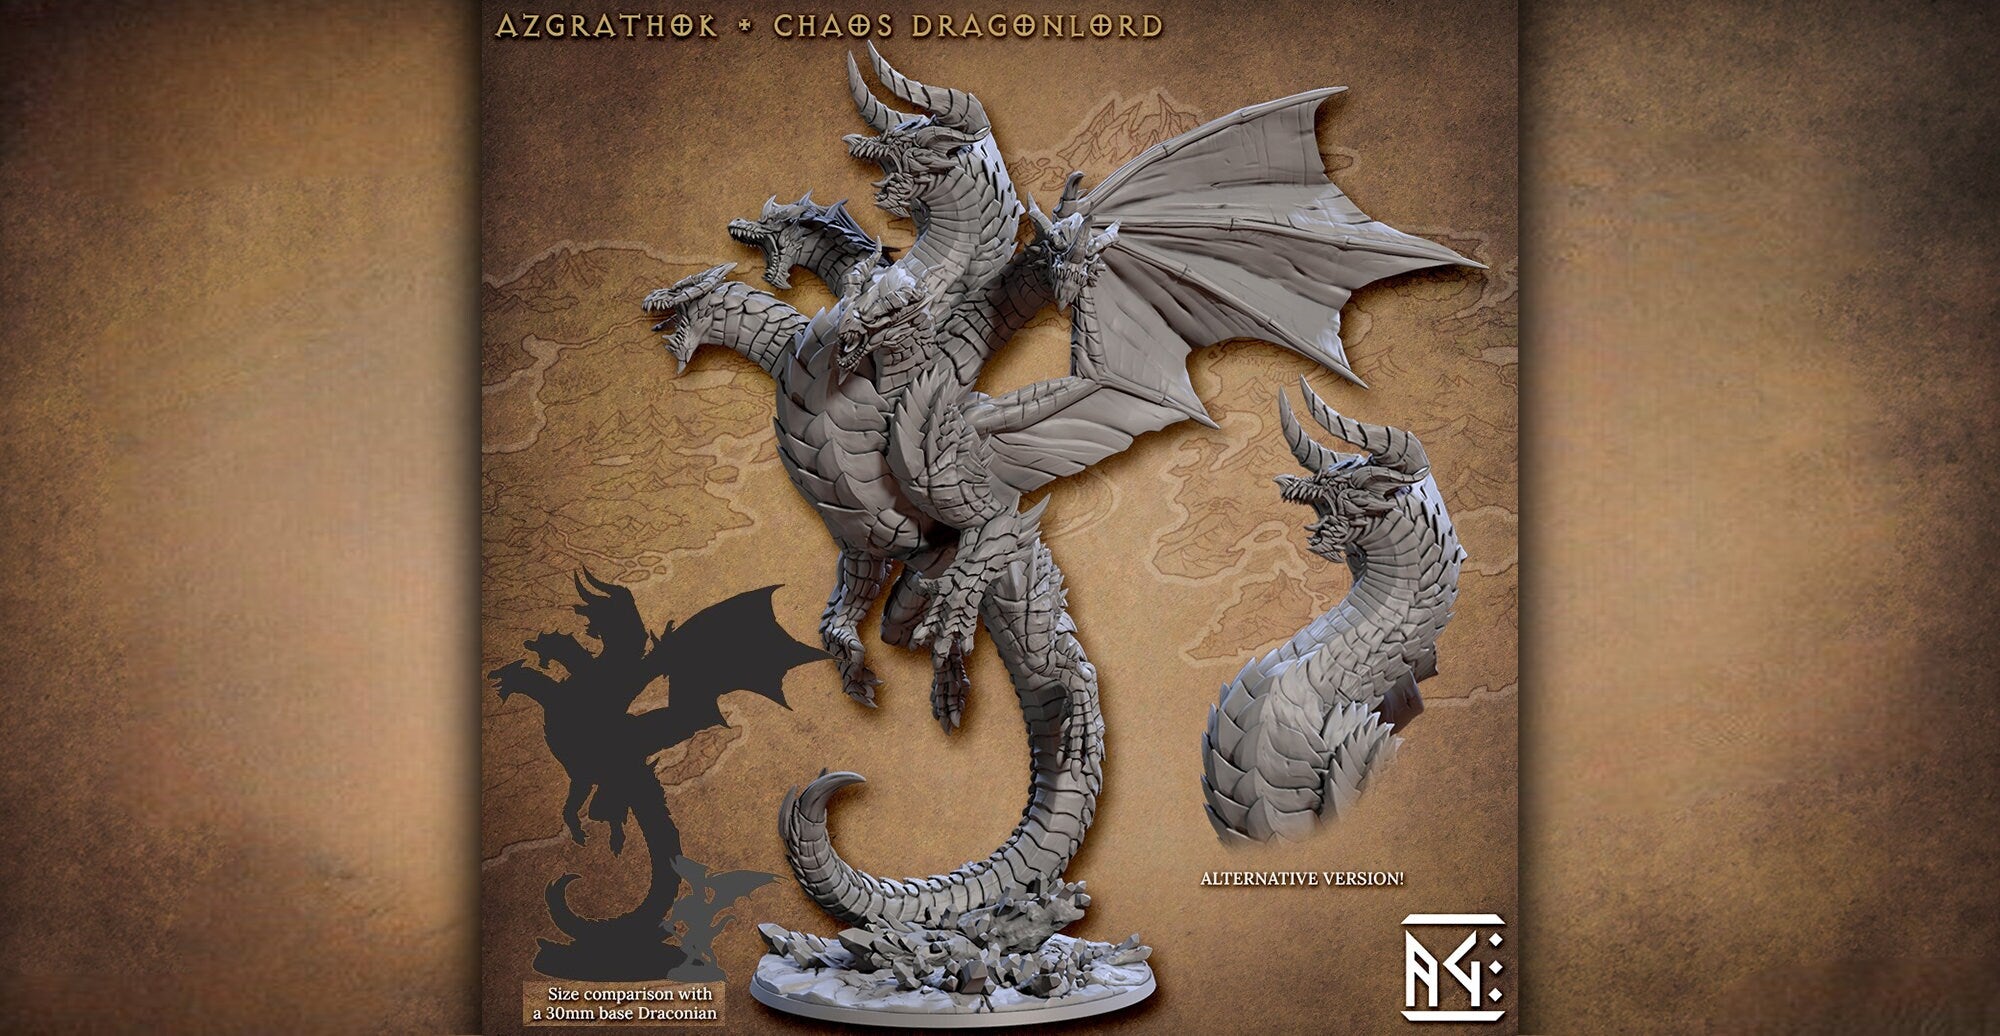 5-Headed-DRAGON "Azgrathok" | 8K 3D Print | Dungeons and Dragons | DnD | Pathfinder | Tabletop | Hero Size | 28-32 mm-Role Playing Miniatures